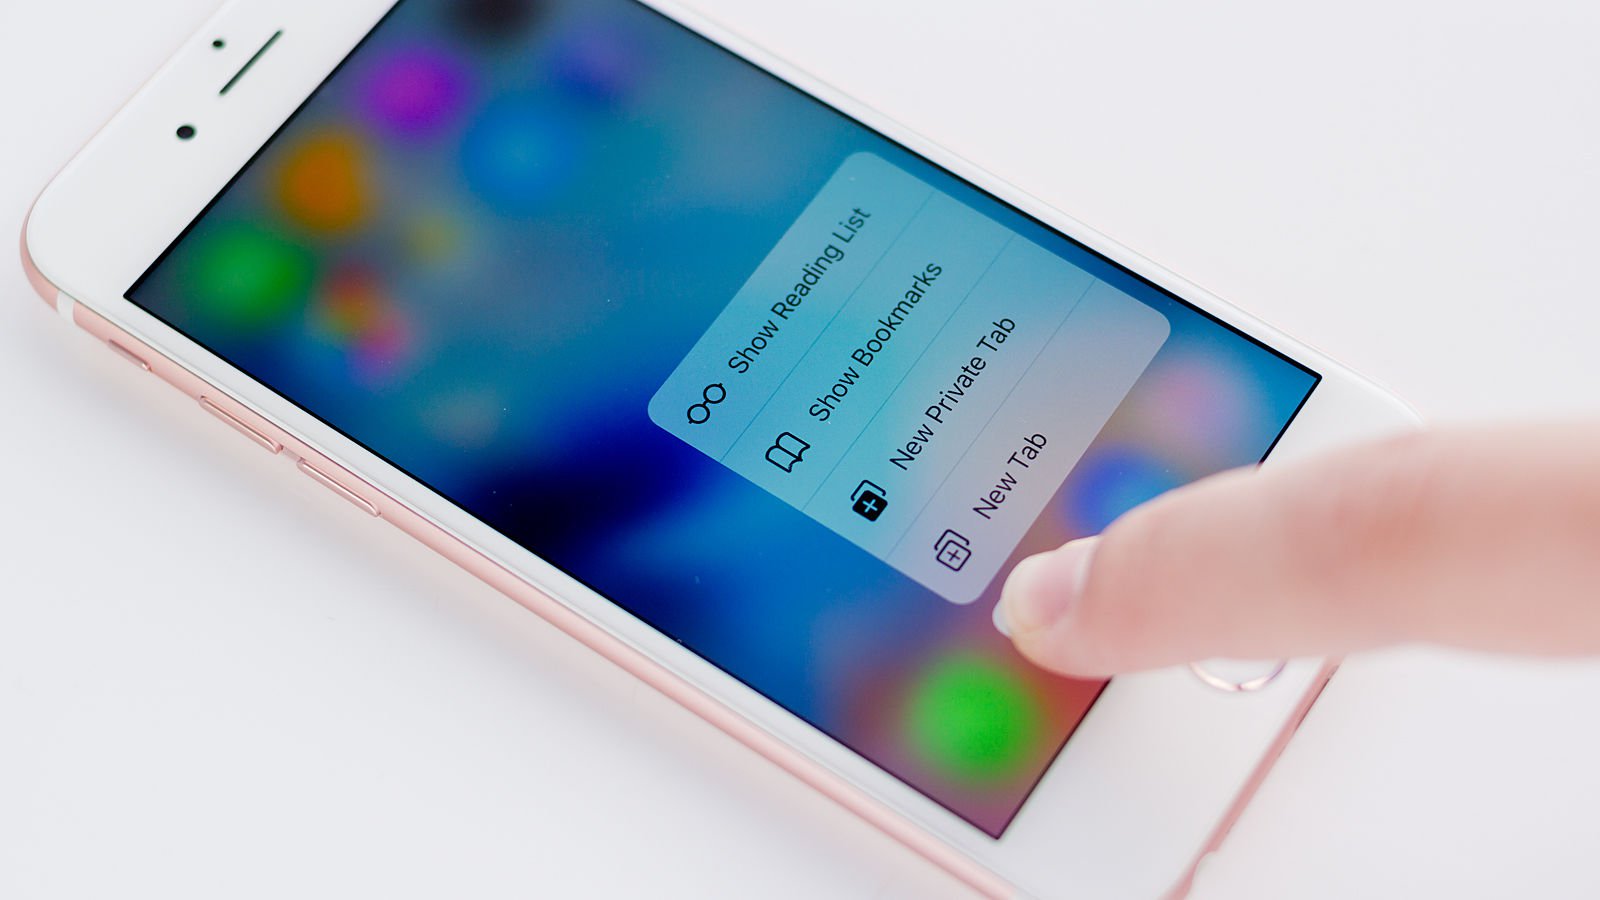 iPhone 6s 3D Touch Enables Aftertouch Control On Music Apps